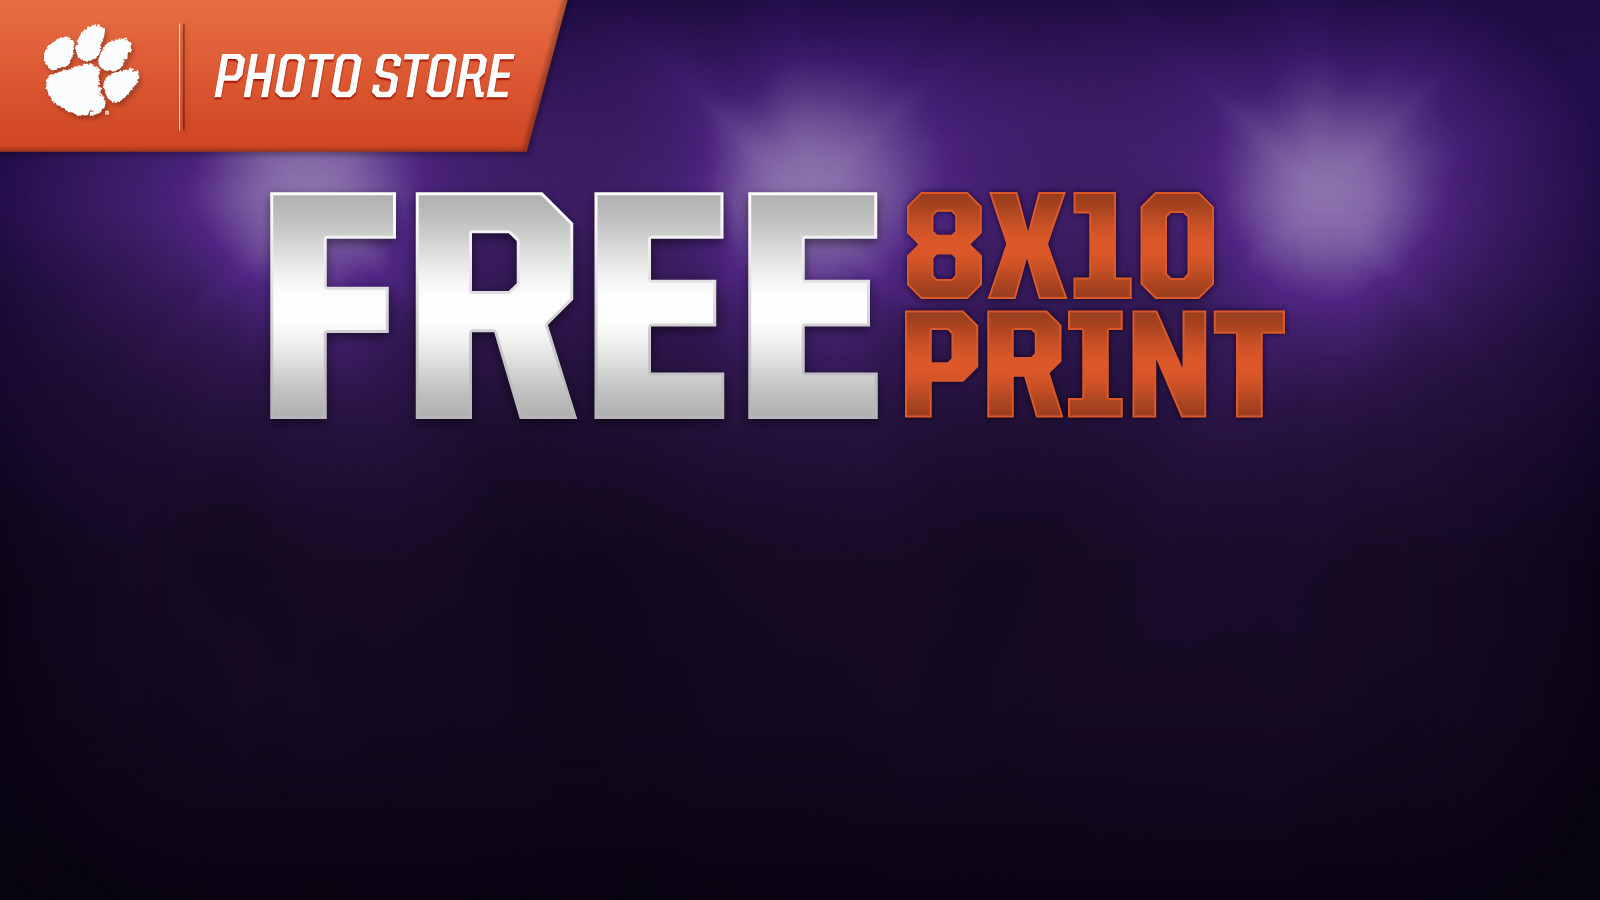 ClemsonTigers.com Photo Store Grand Opening Giveaway